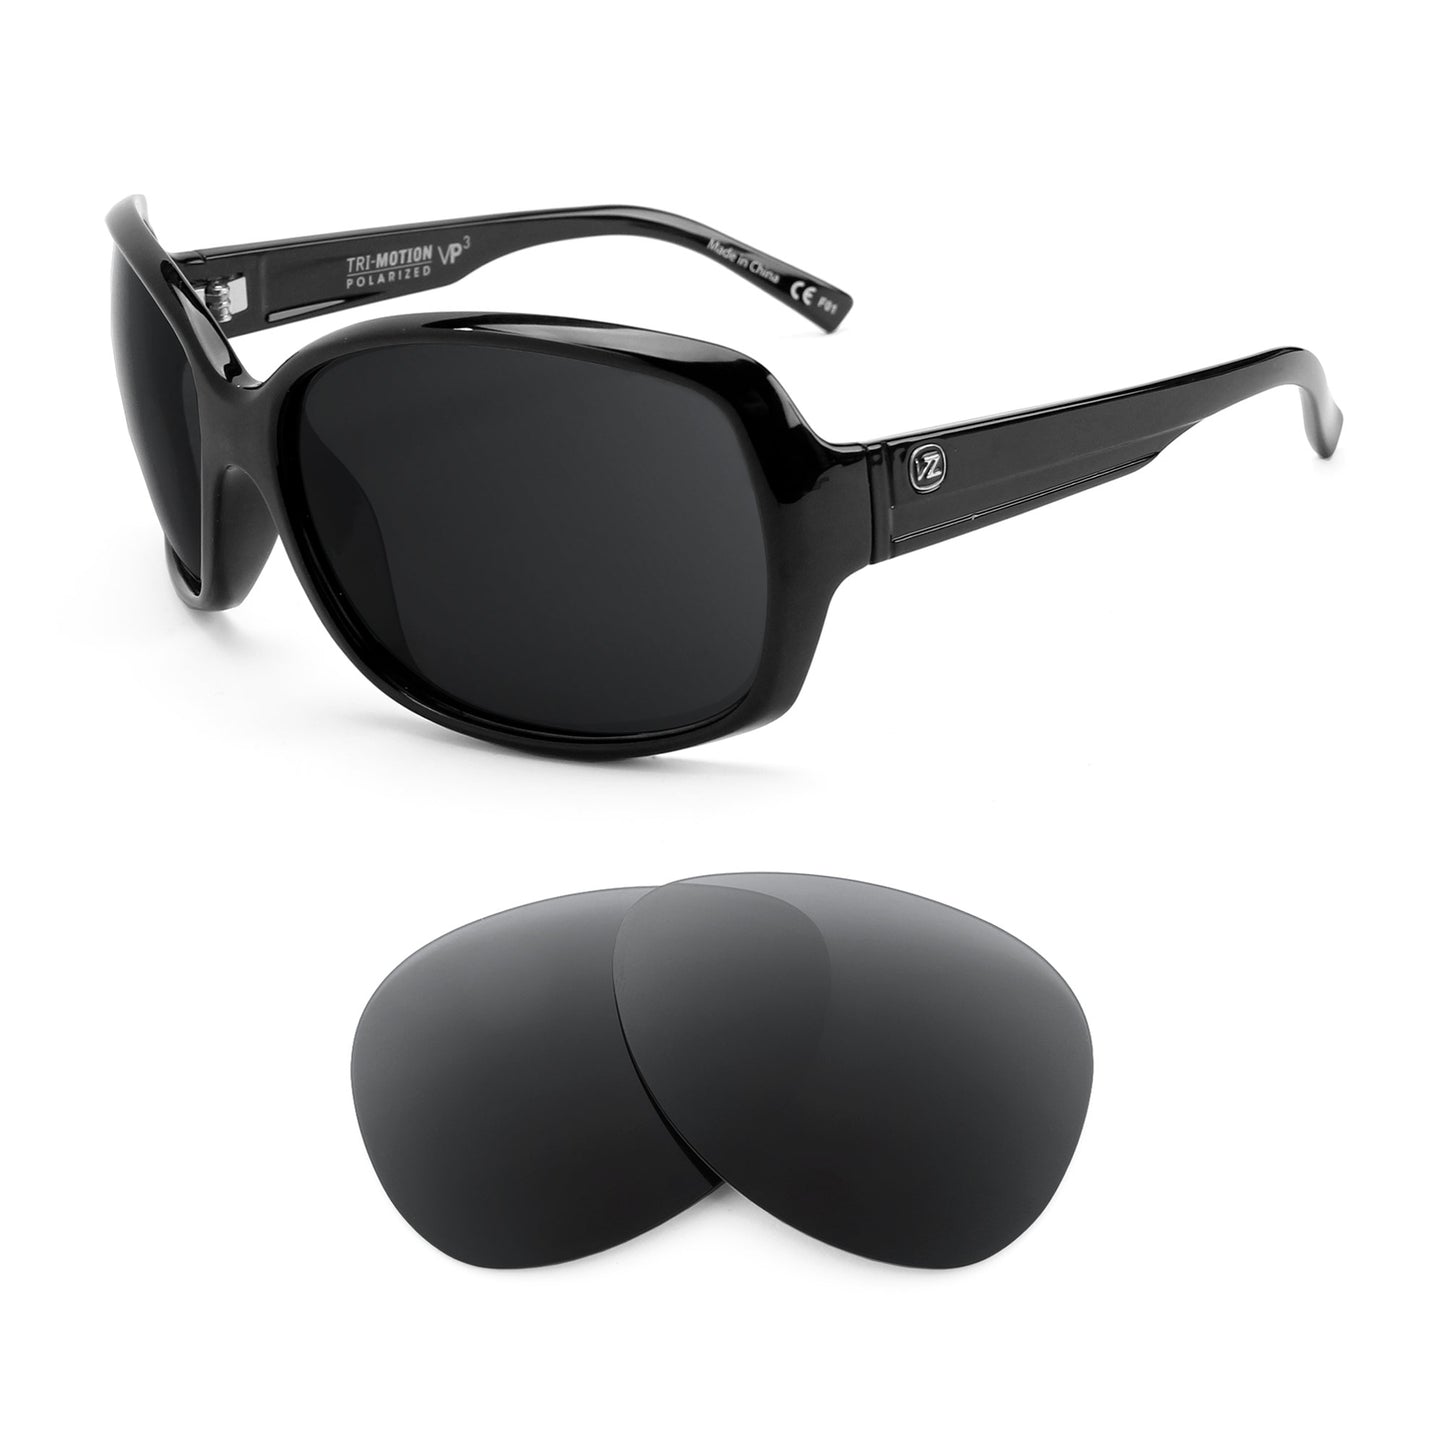 VonZipper Ling Ling sunglasses with replacement lenses